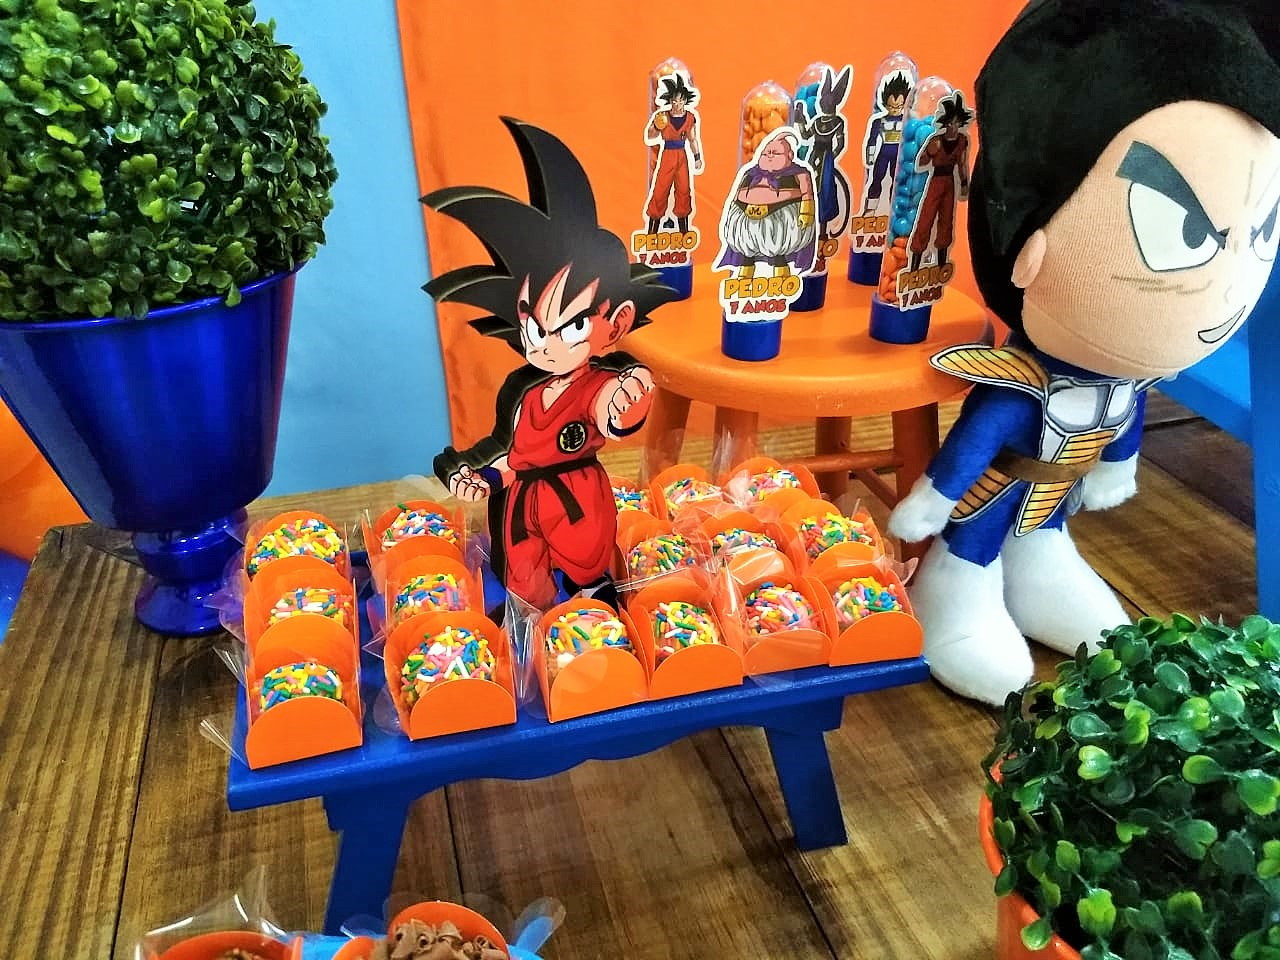 Dragon Ball Cake Topper Ideas - Set up various printable images to place on your cake or cupcake with Goku, Vegeta, Gohan and other warriors.